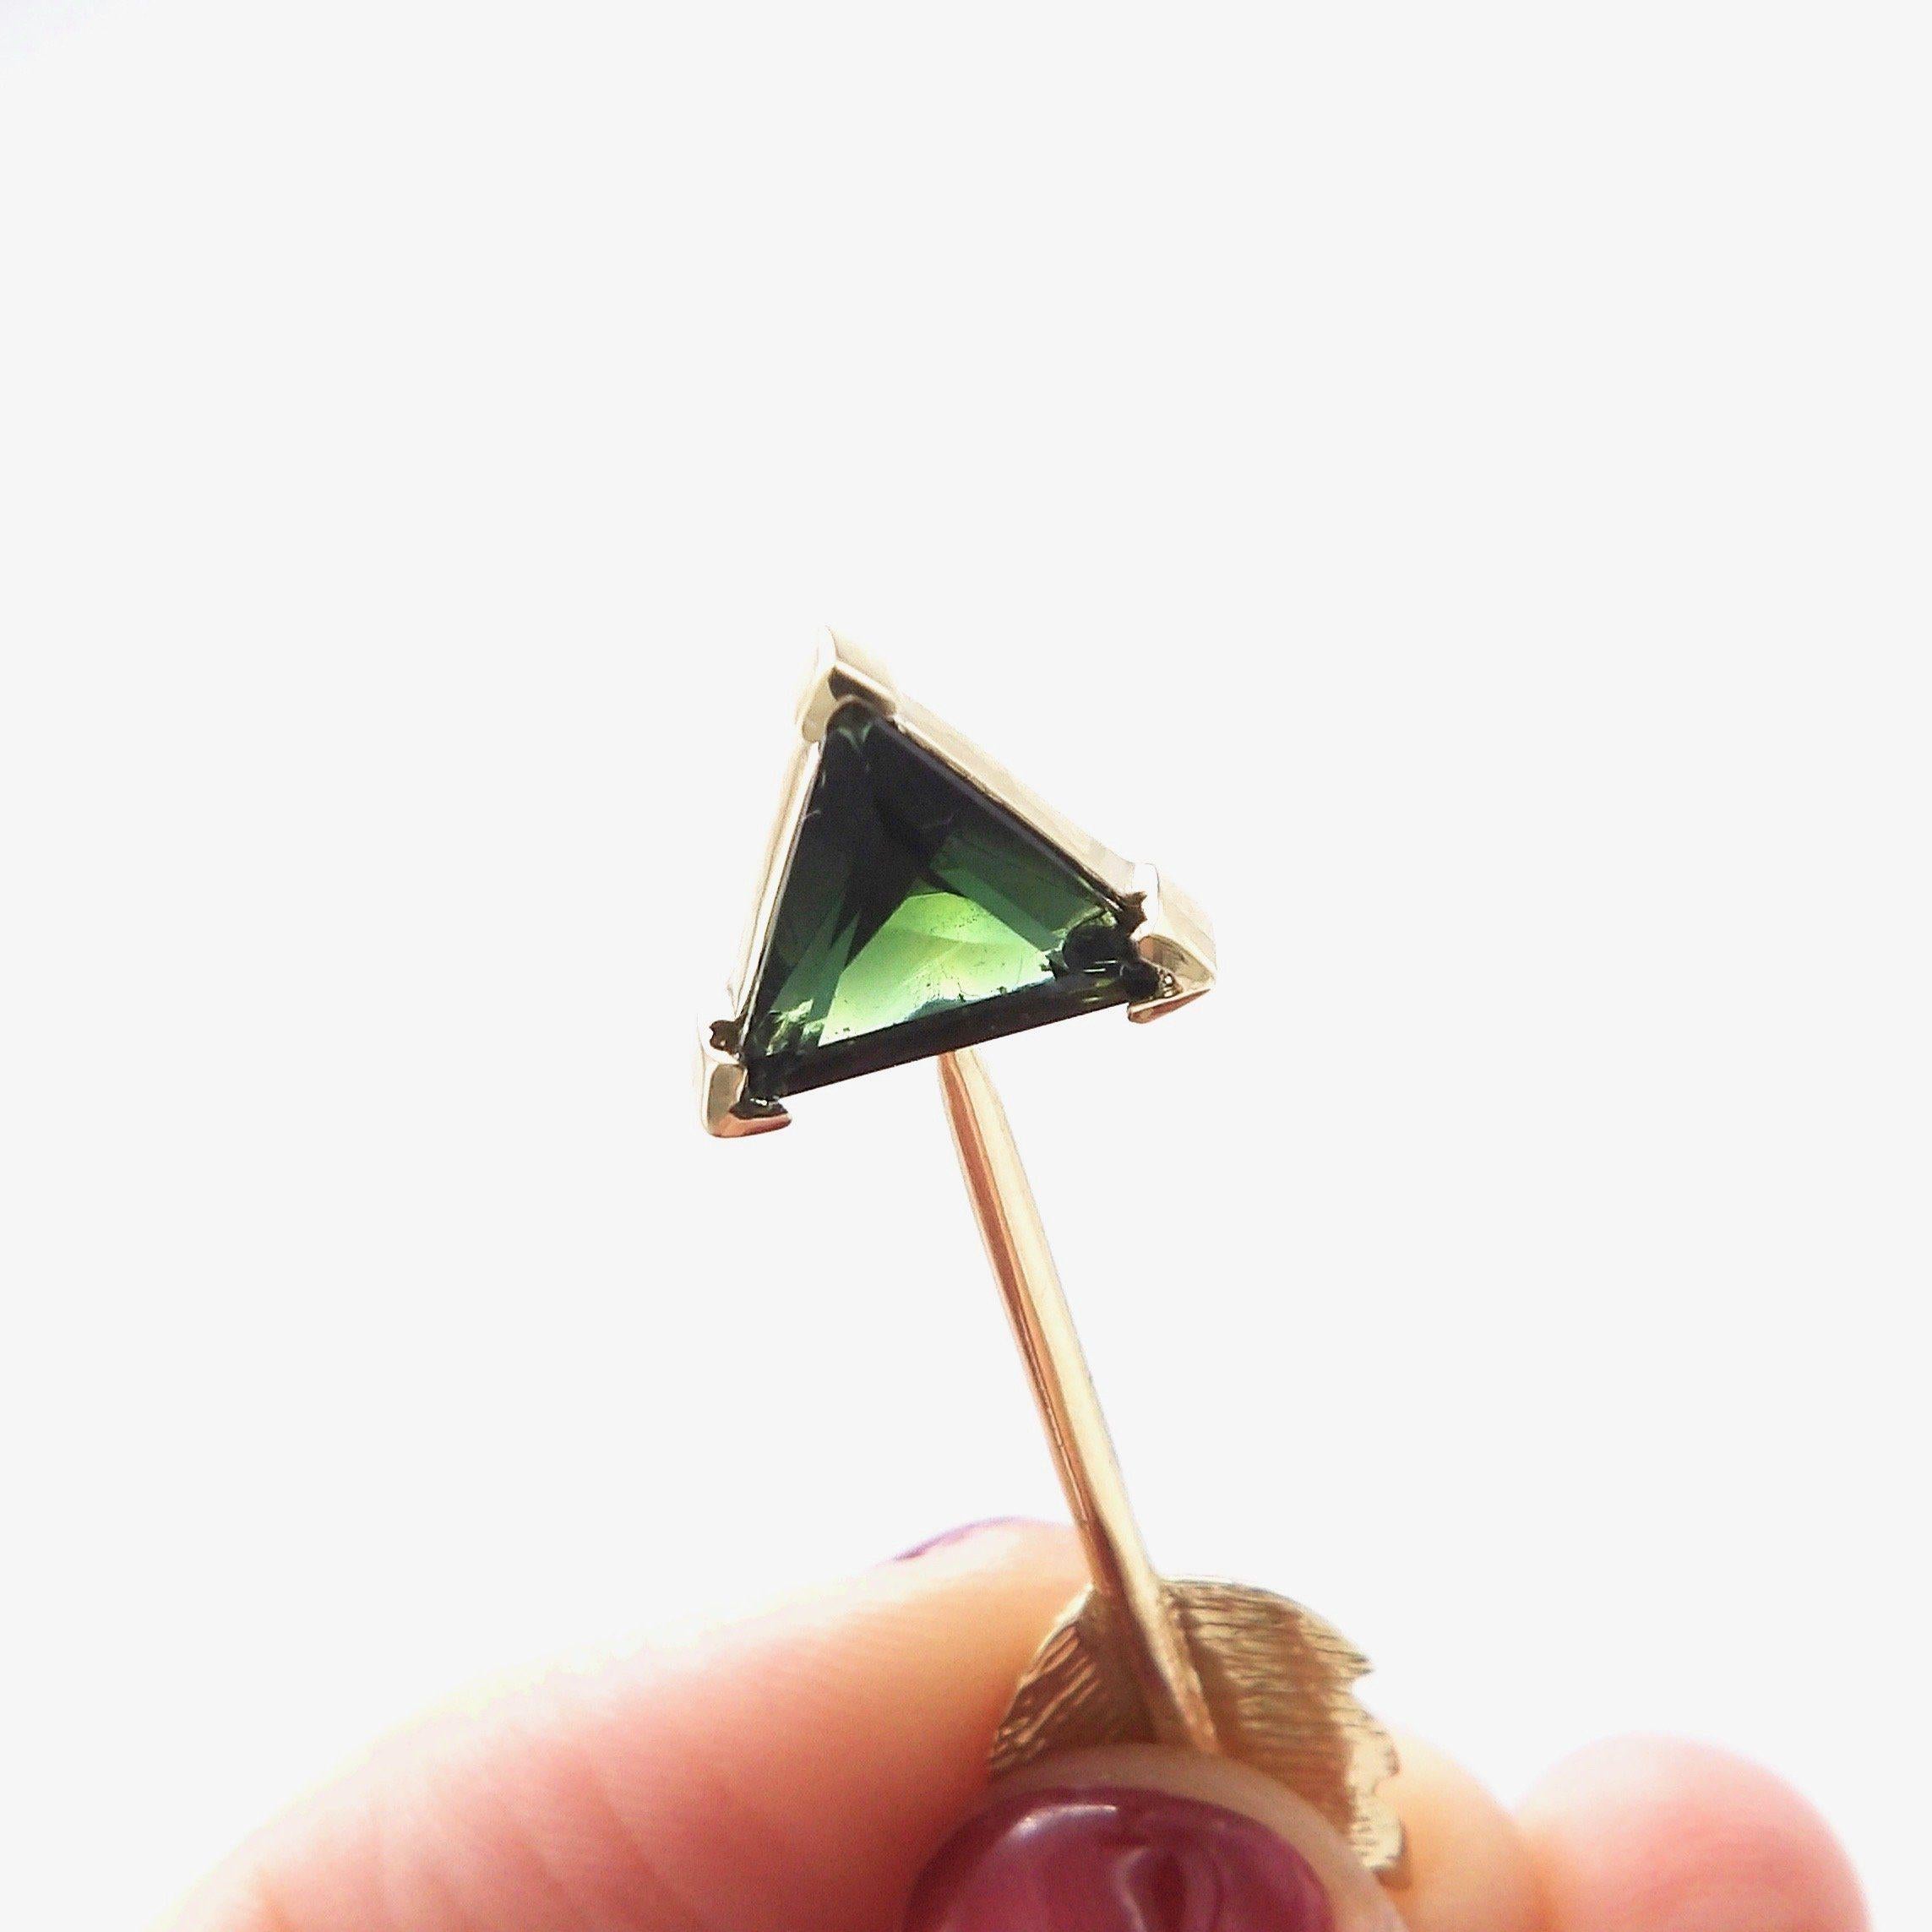 This gorgeous 14K arrow features a luminous dark green tourmaline. This signature piece was inspired by the arrows of martyrdom of Saint Sebastian. An iconic figure, he was ordered to be killed by the Roman emperor Diocletian. He was persecuted, and